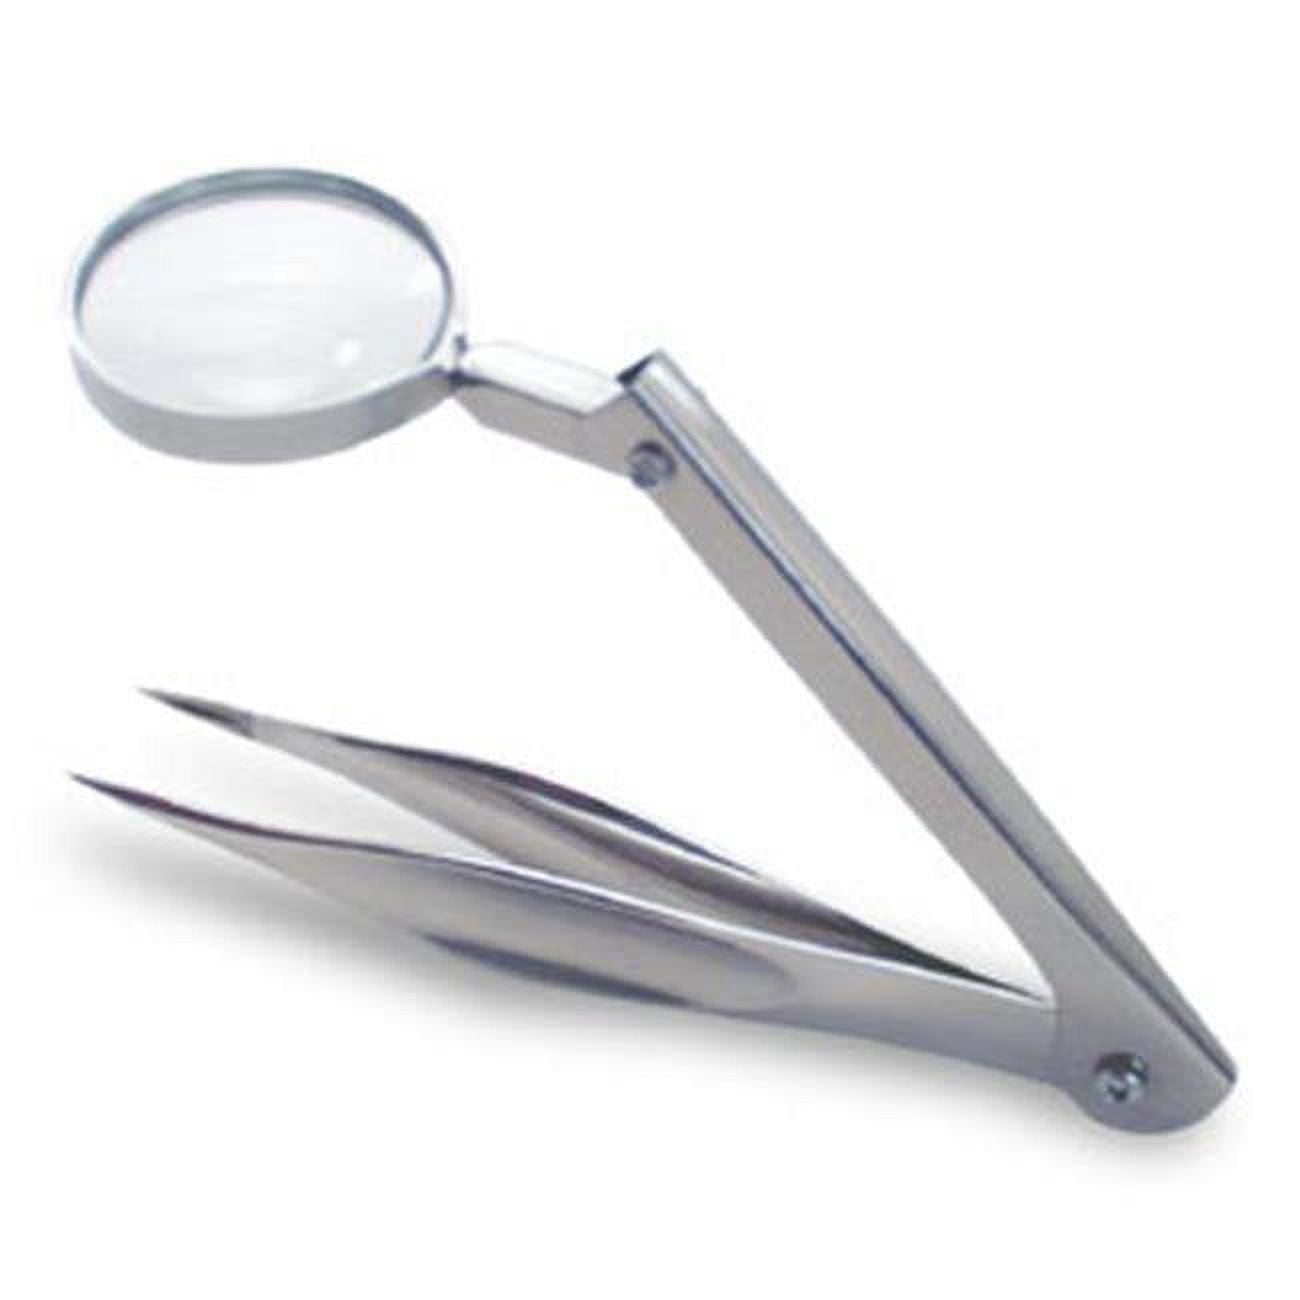 Miracle Point Precision Tweezers